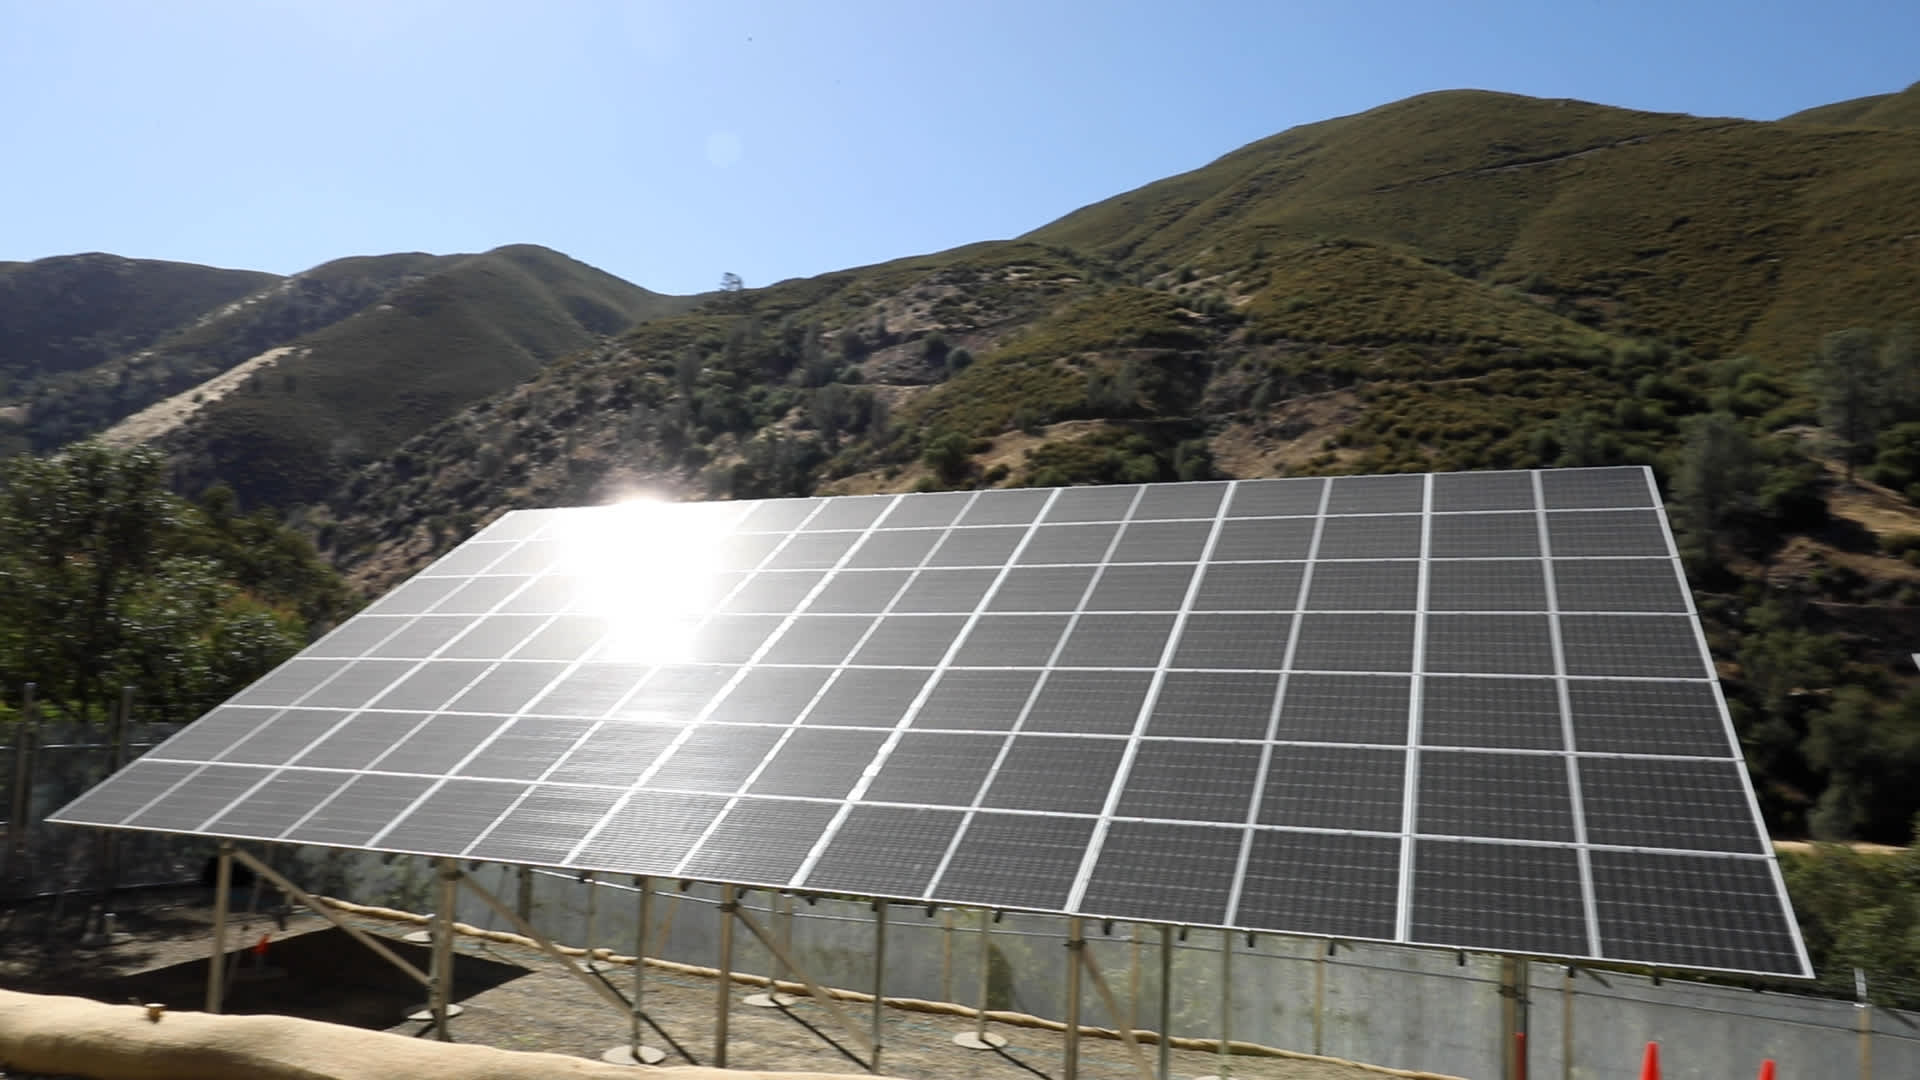 PG&E partnered with BoxPower to build its first remote microgrid, which started providing 70-90% renewable power to five customers in Briceburg, California, in April, 2021.